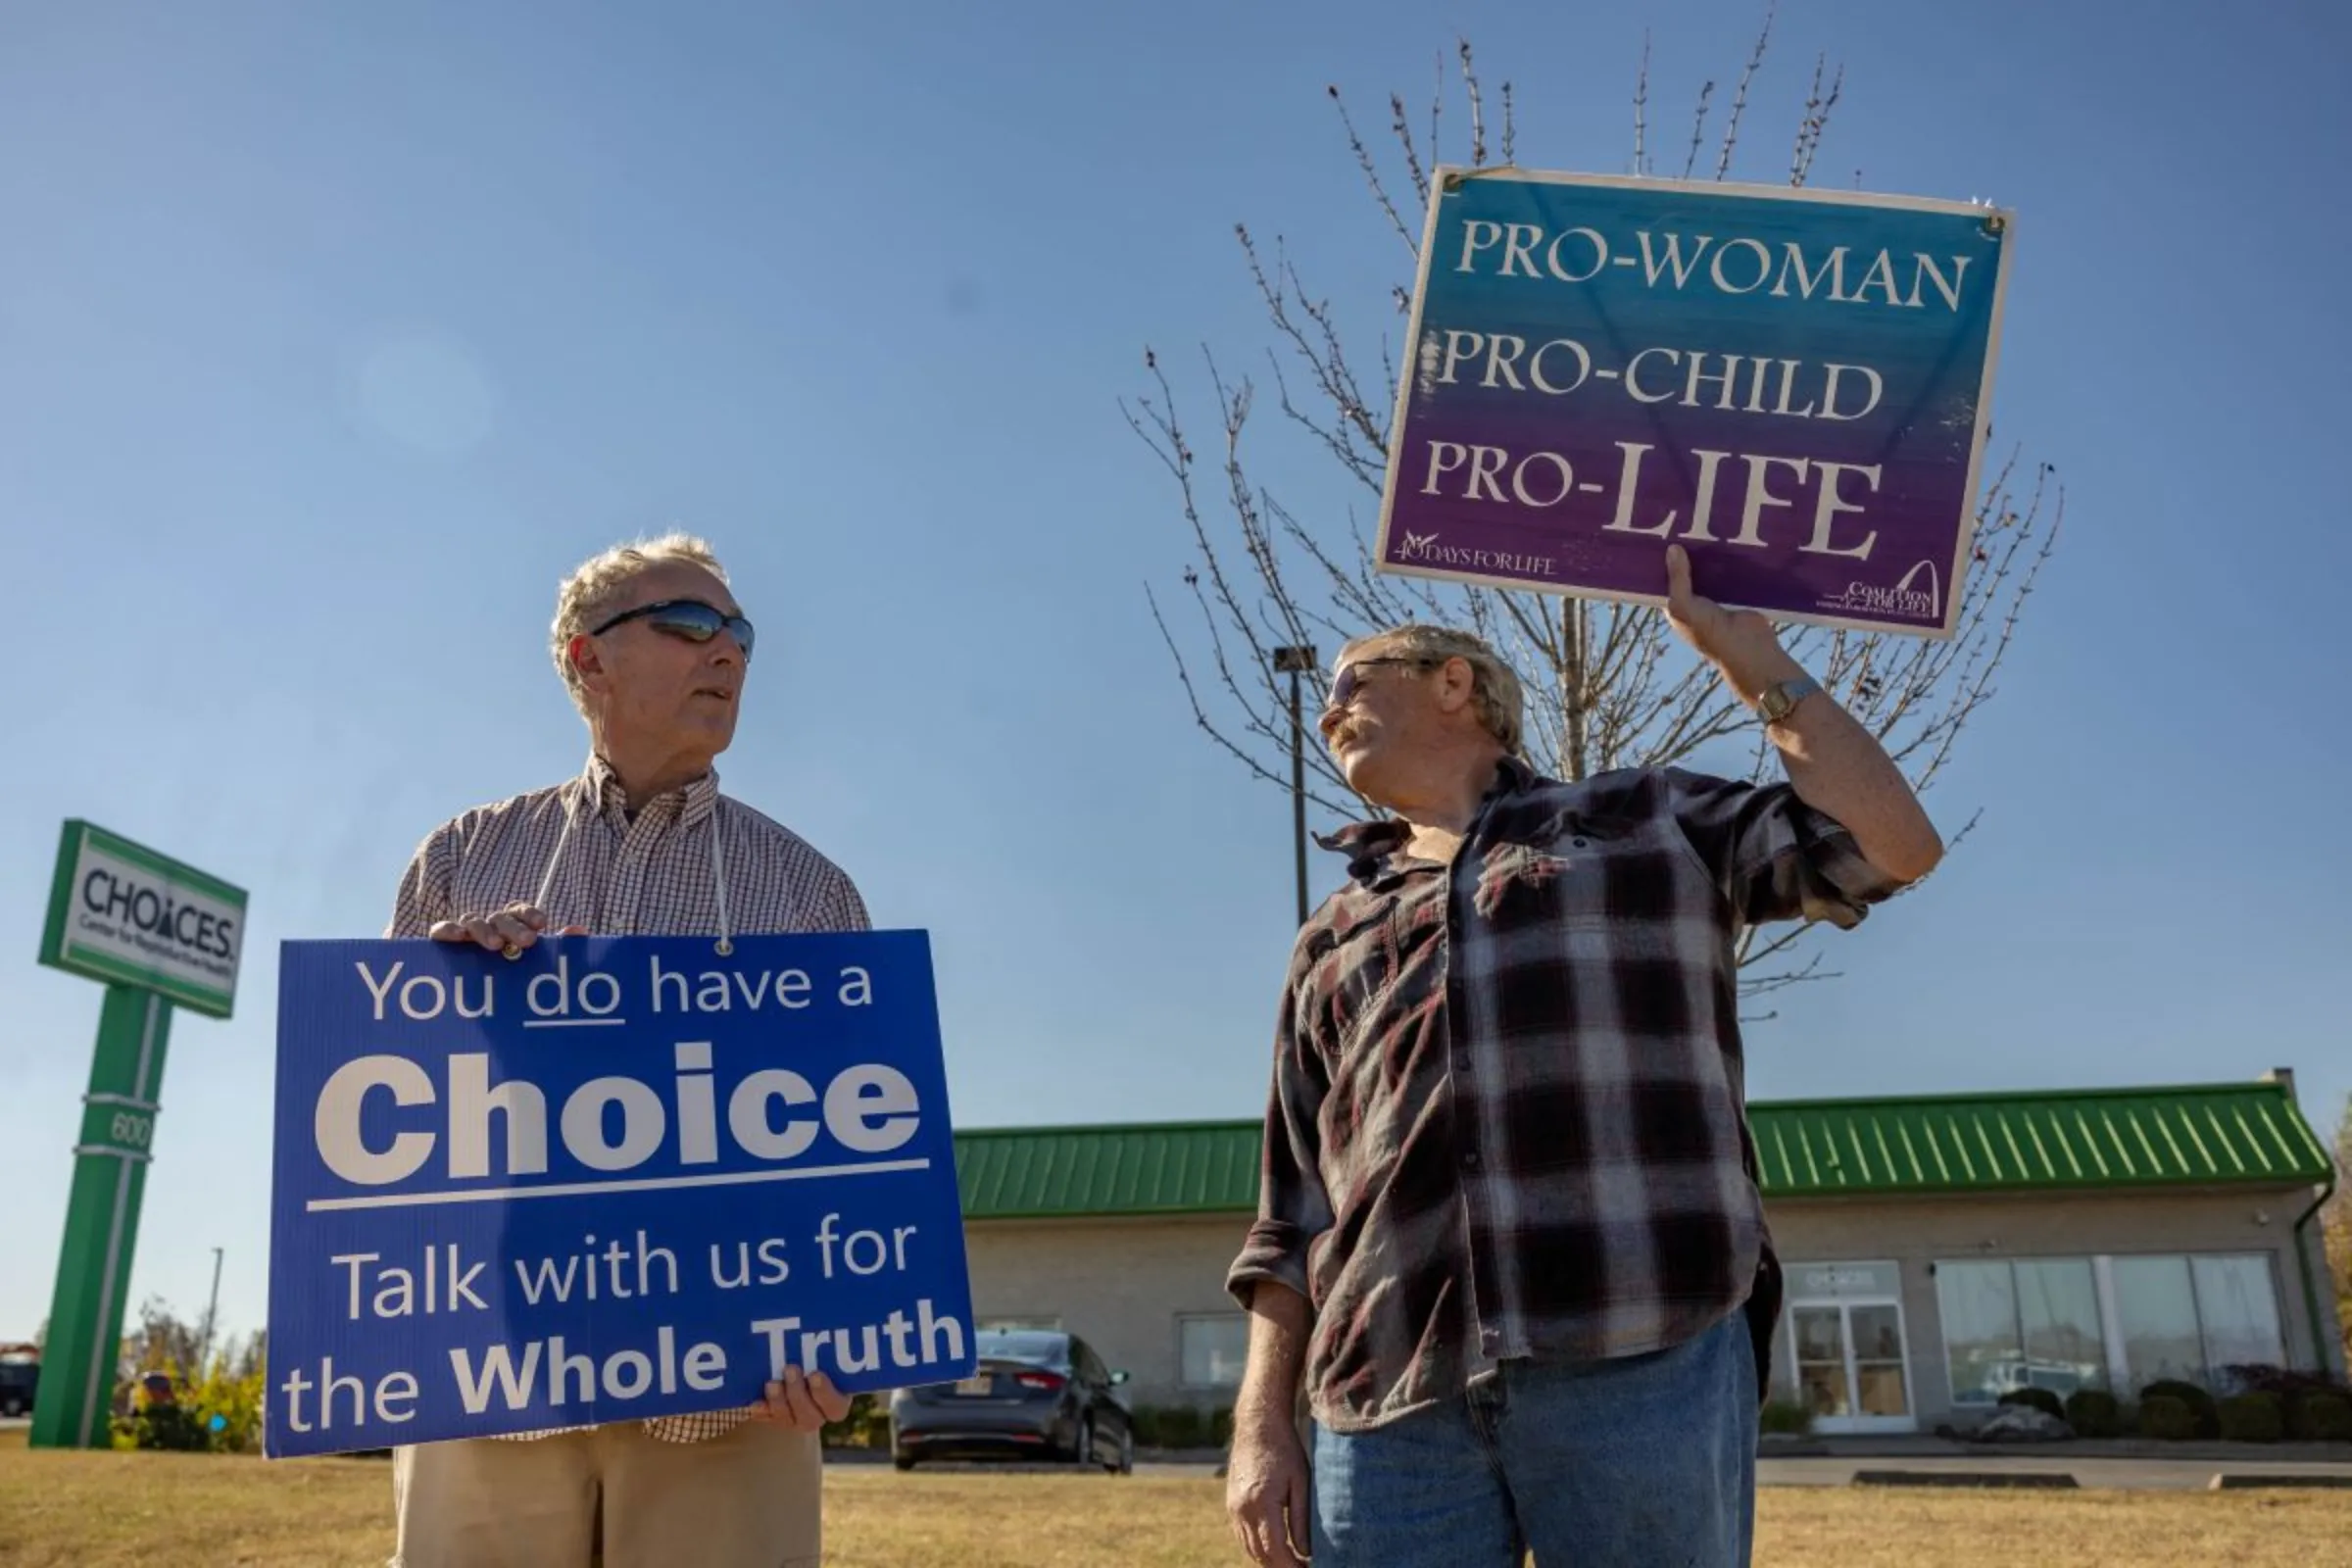 Anti-abortion demonstrators protest outside a clinic called Choices in Carbondale, Illinois, U.S., November 2, 2022. REUTERS/Evelyn Hockstein